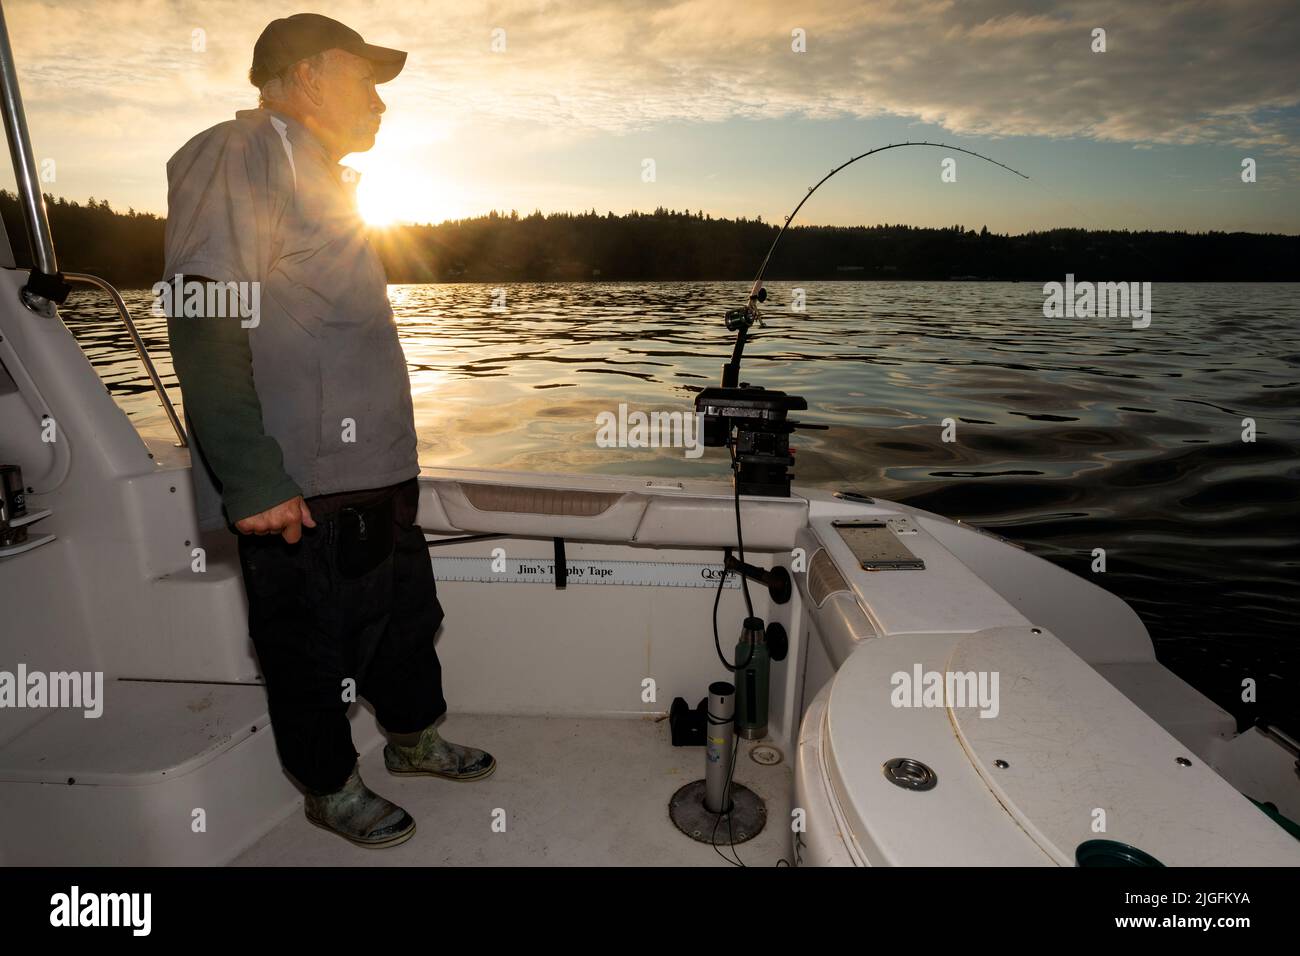 WA20628-00....WASHINGTON - Phil Russell watches his fishing pole for a strike while trolling for salmon in the Puget Sound. MR# R8 Stock Photo